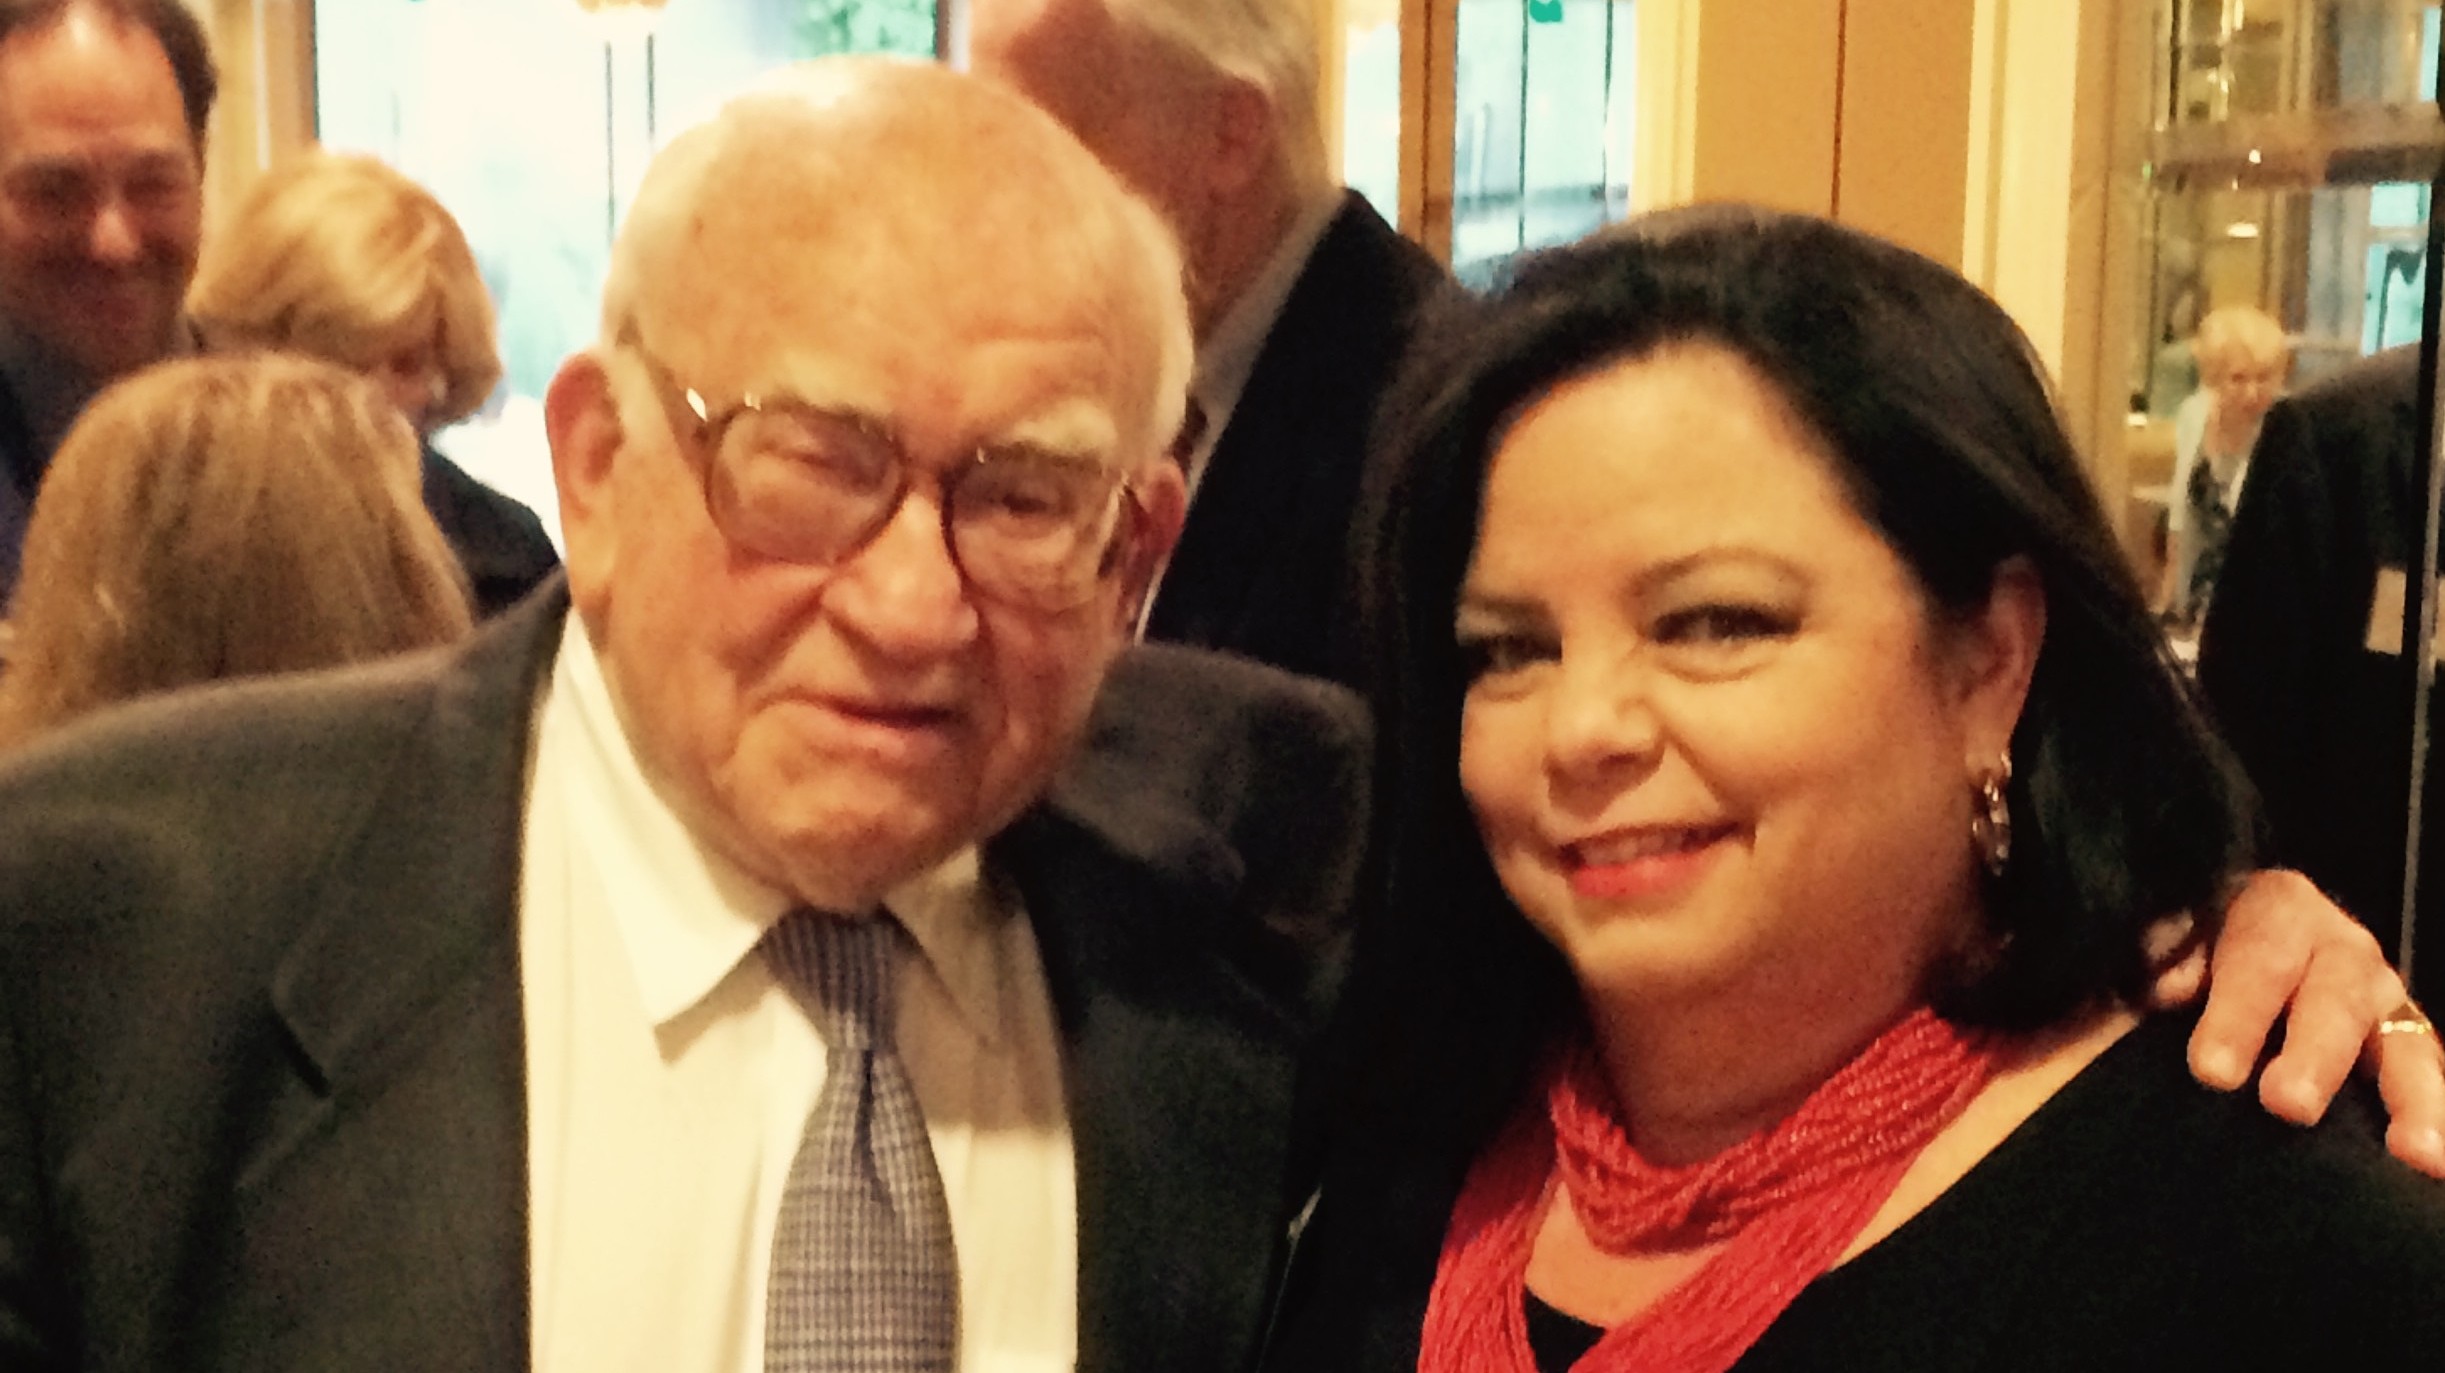 Photo Credit: Ed Asner and Cynthia Willis-Esqueda at the Death Penalty Focus awards dinner